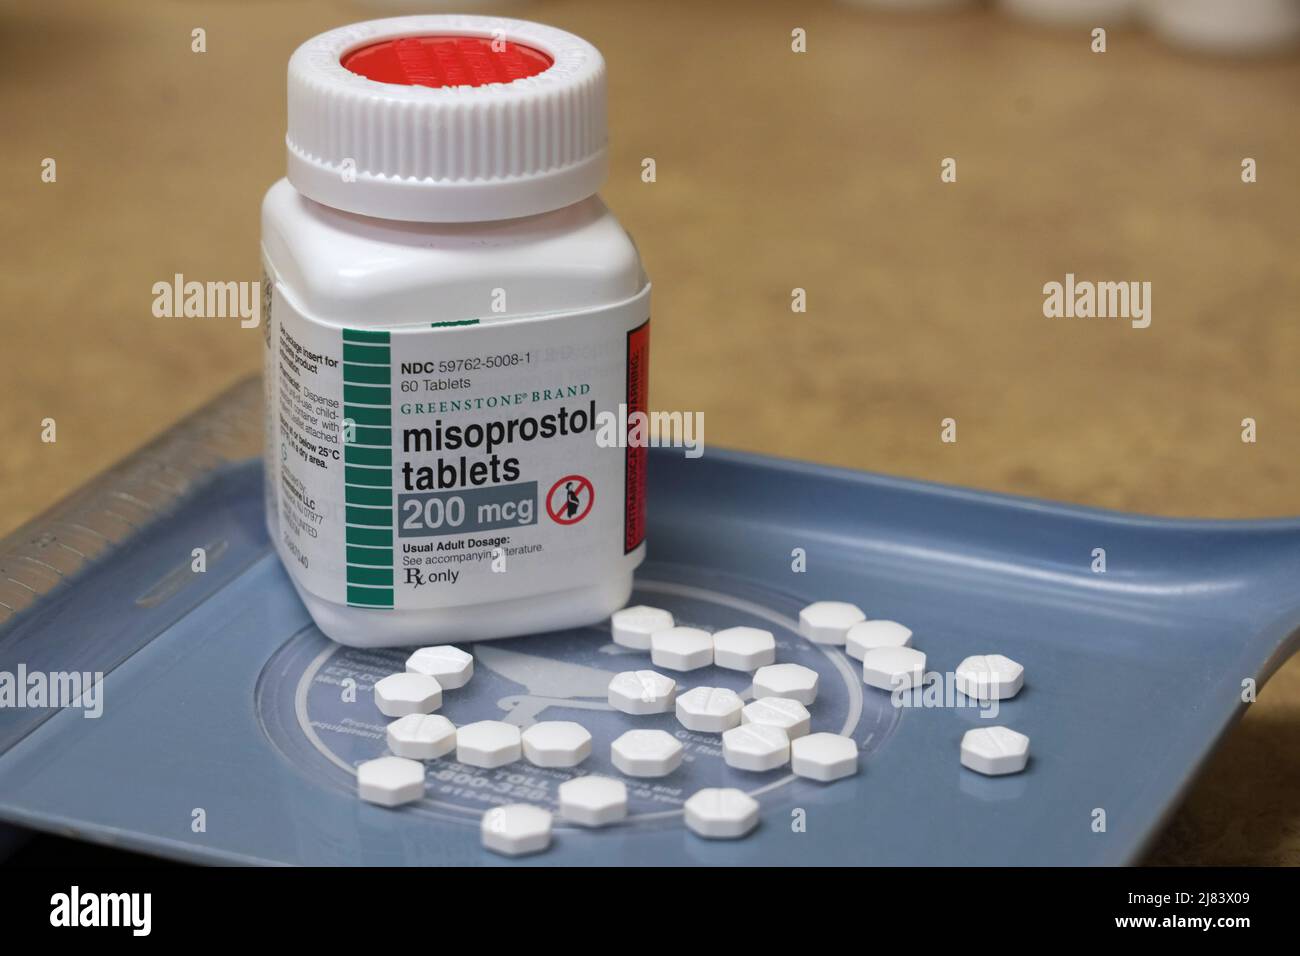 Pills of Misoprostol, used to terminate early pregnancies, are displayed in a pharmacy in Provo, Utah, U.S. May 12, 2022. REUTERS/George Frey Stock Photo